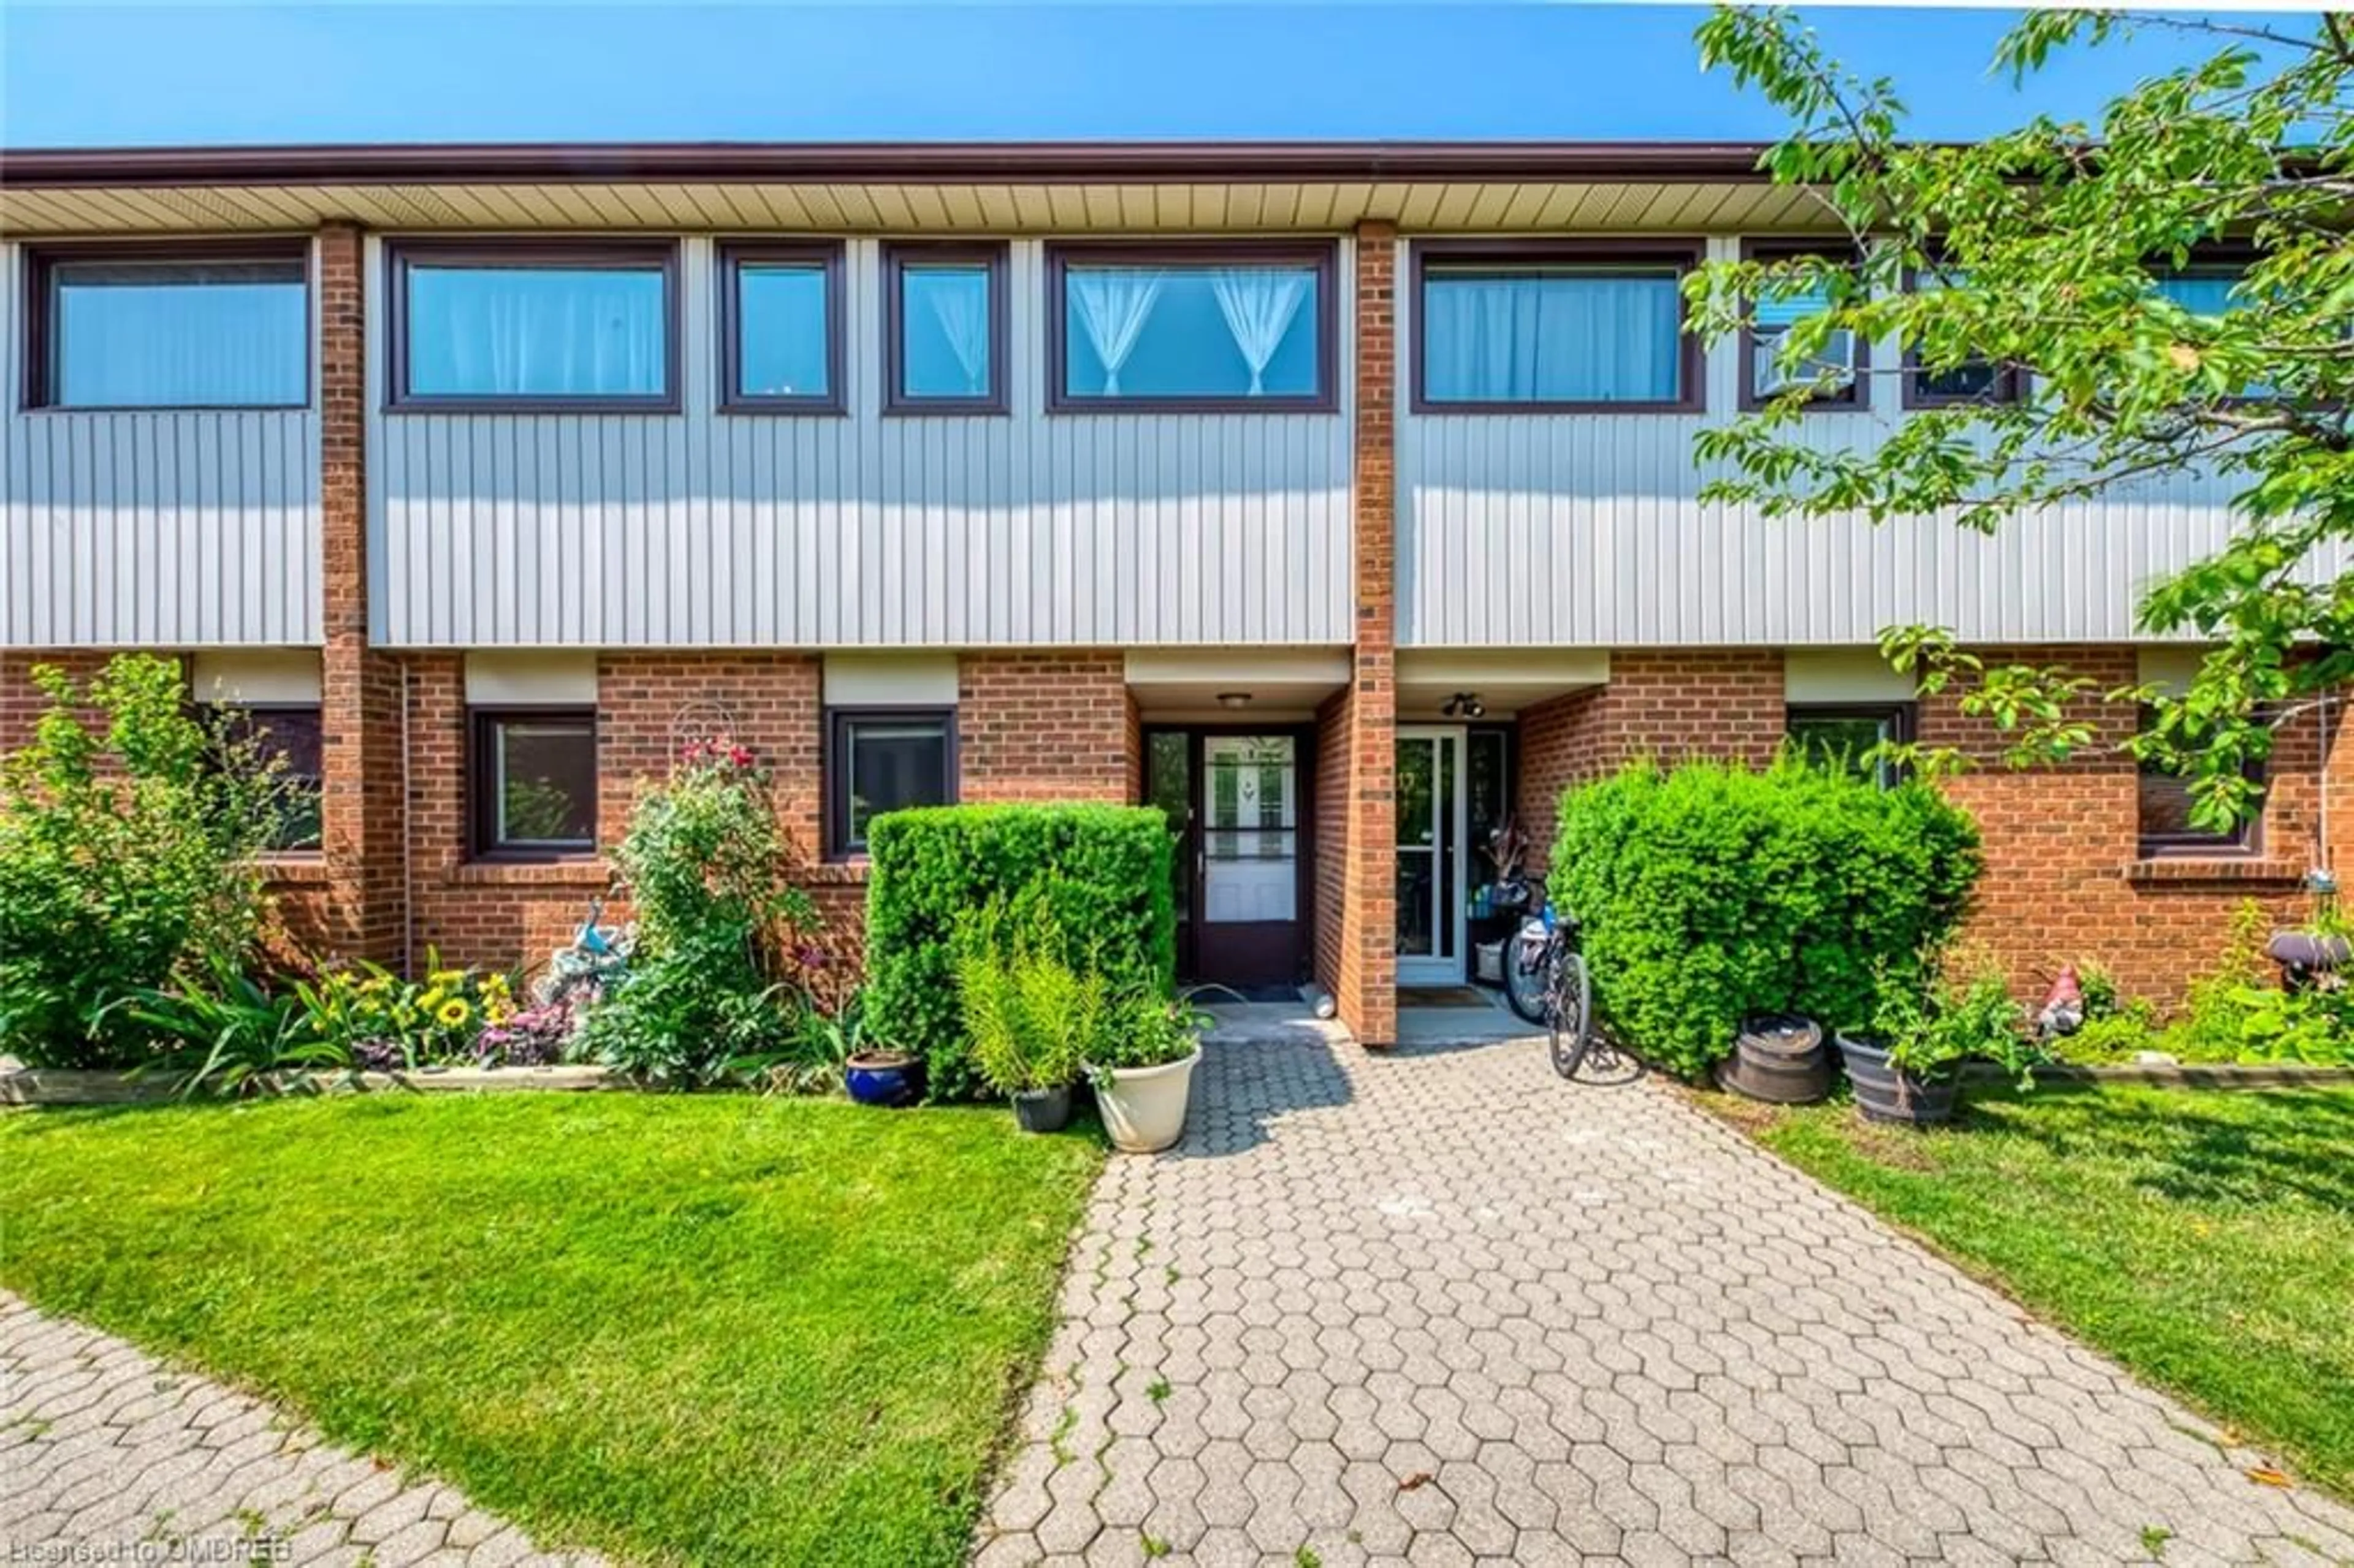 Home with brick exterior material for 530 Falgarwood Dr #18, Oakville Ontario L6H 1N3